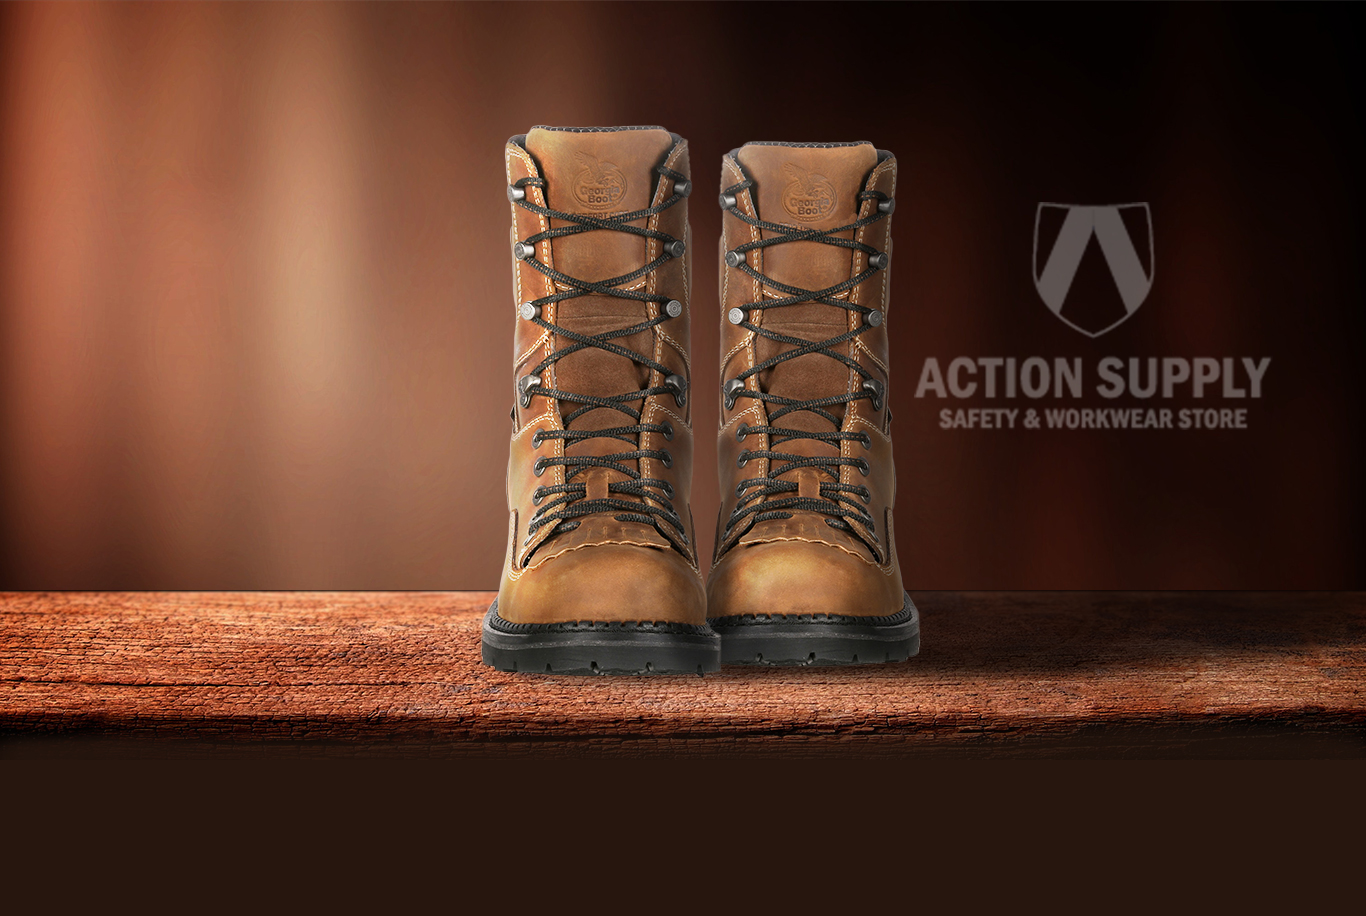 Nice pair of Georgia Boots on table with Action Supply logo in the back